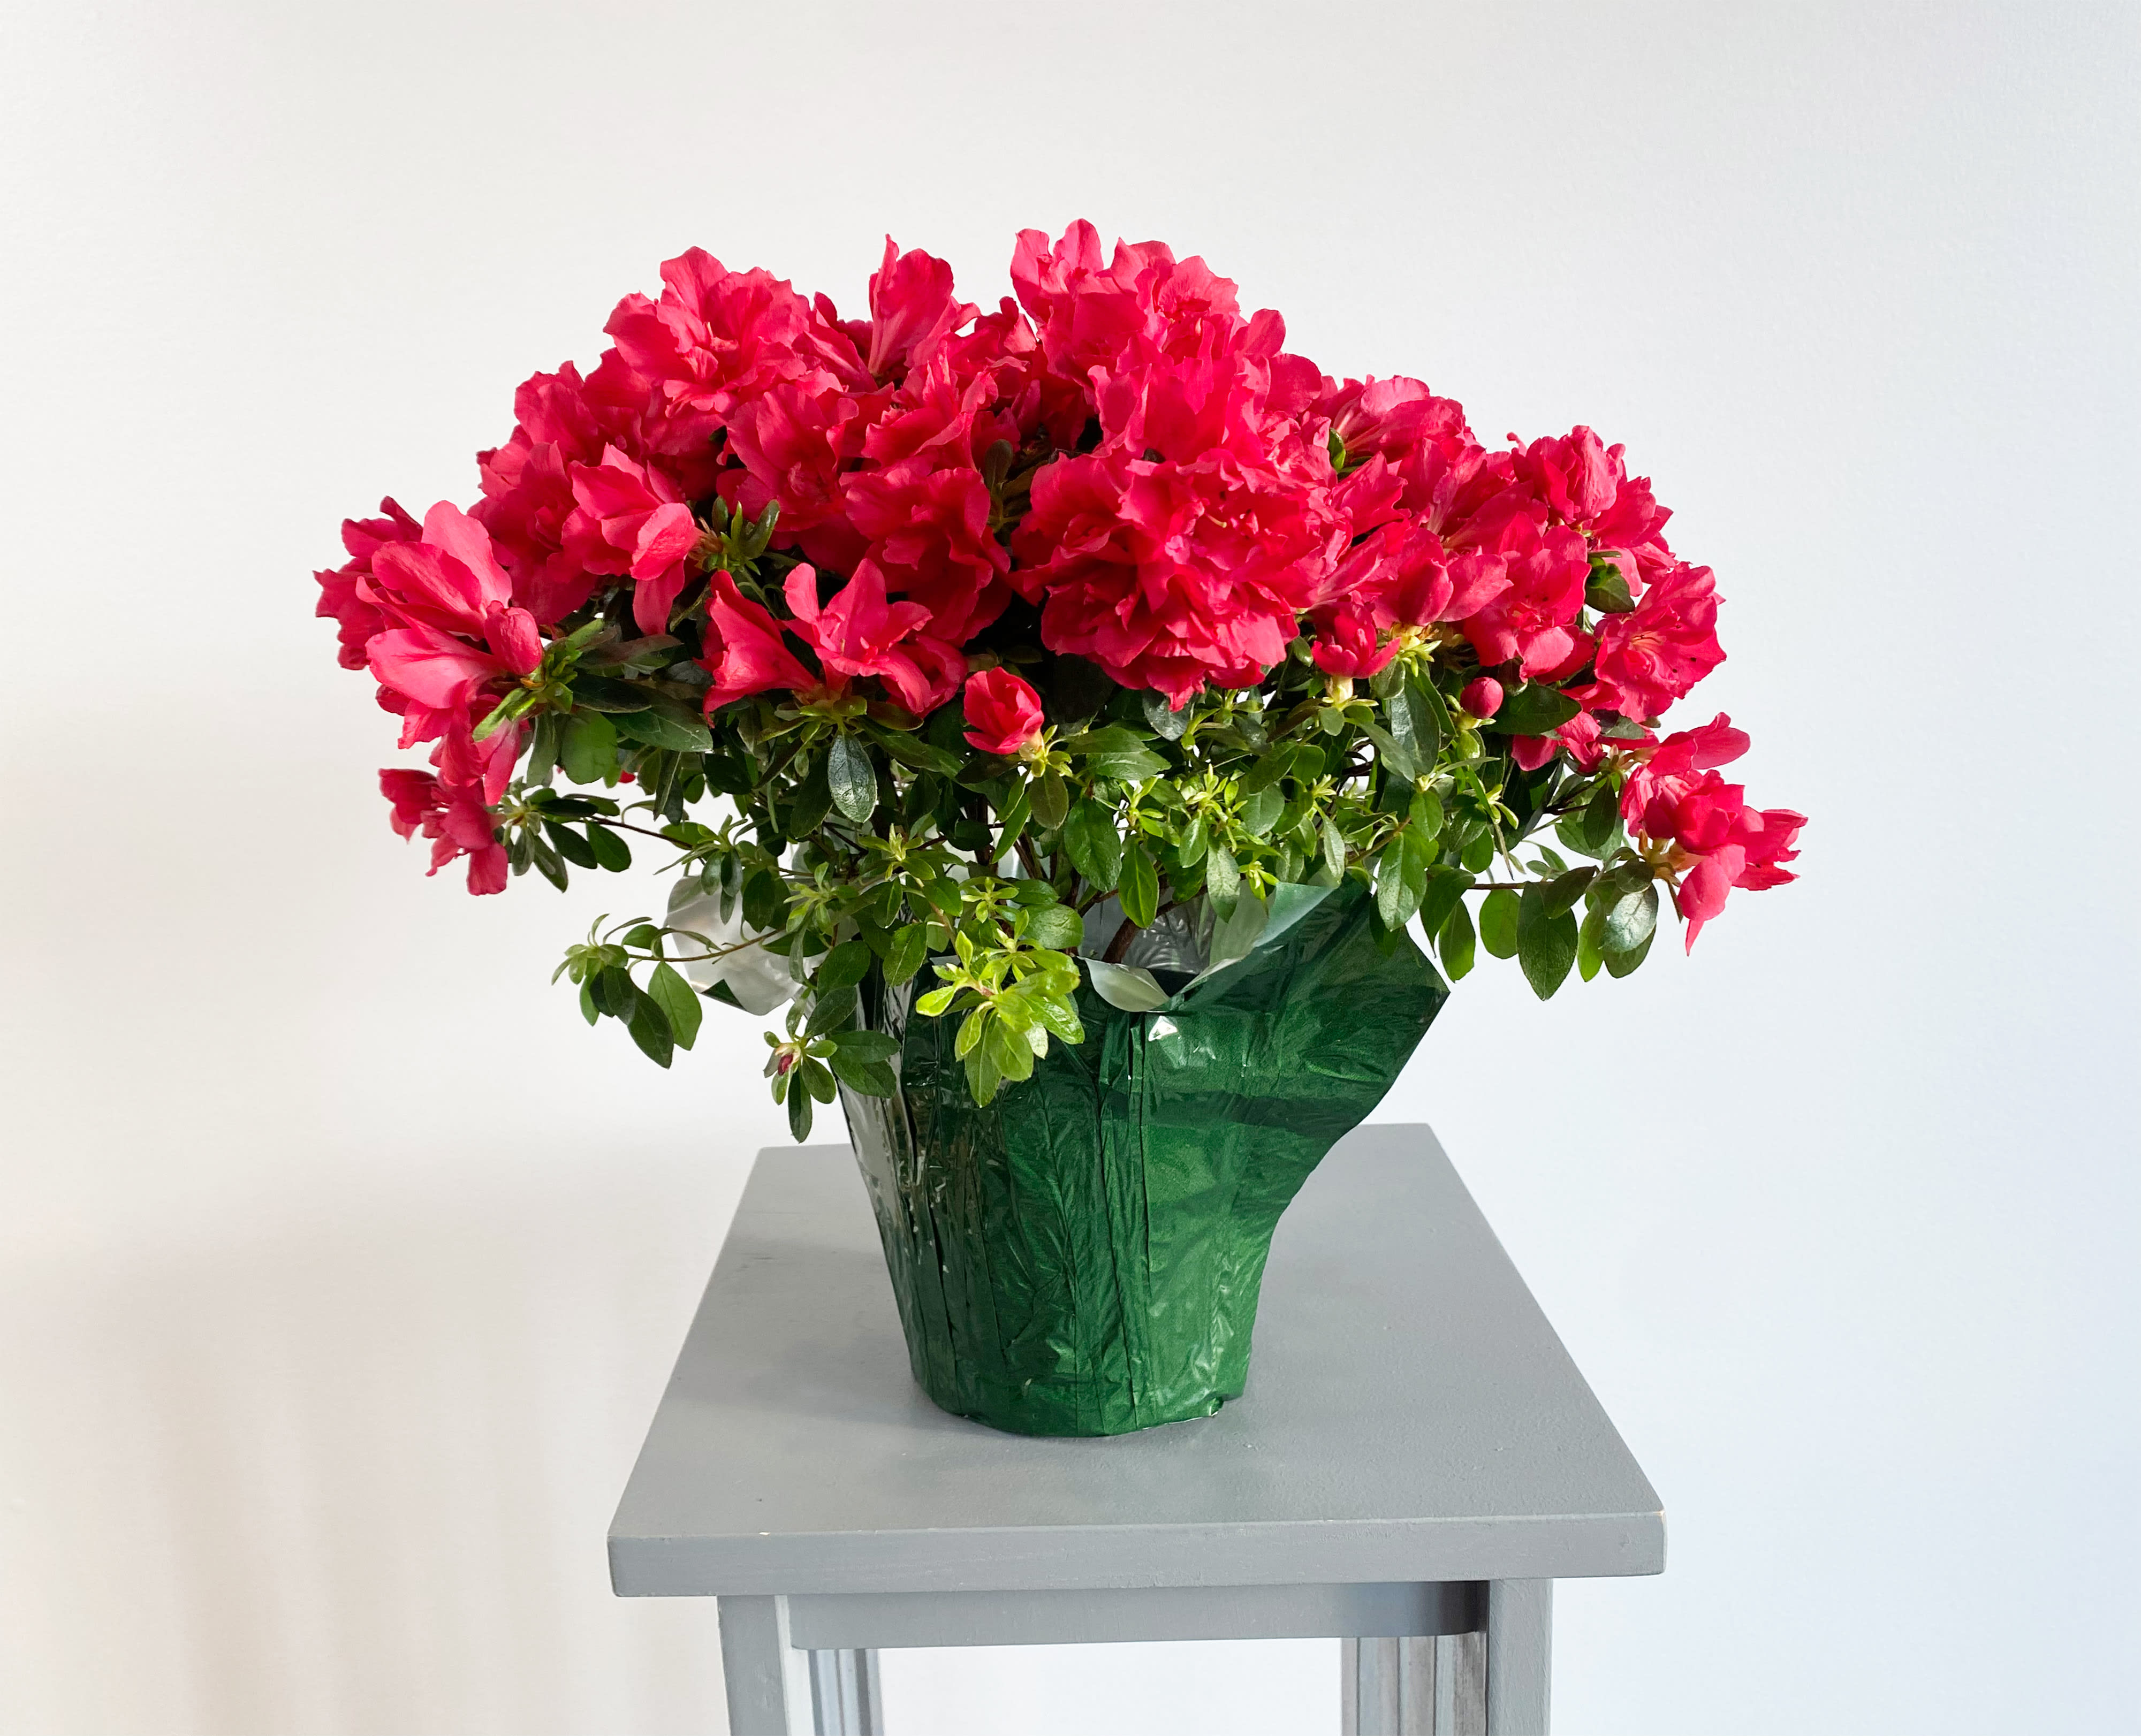 Ruby Red Azalea Plant - Liven up any space with this stunning azalea plant, featuring bright red blooms and dark green foliage. It arrives inside a decorative burlap-lined pot bearing a lovely geometric pattern on the outside as well as the phrase &quot;Flowers &amp; Garden.&quot; This gift, perfect for spring and summer, will make a beautiful display in a breakfast nook or entryway. 